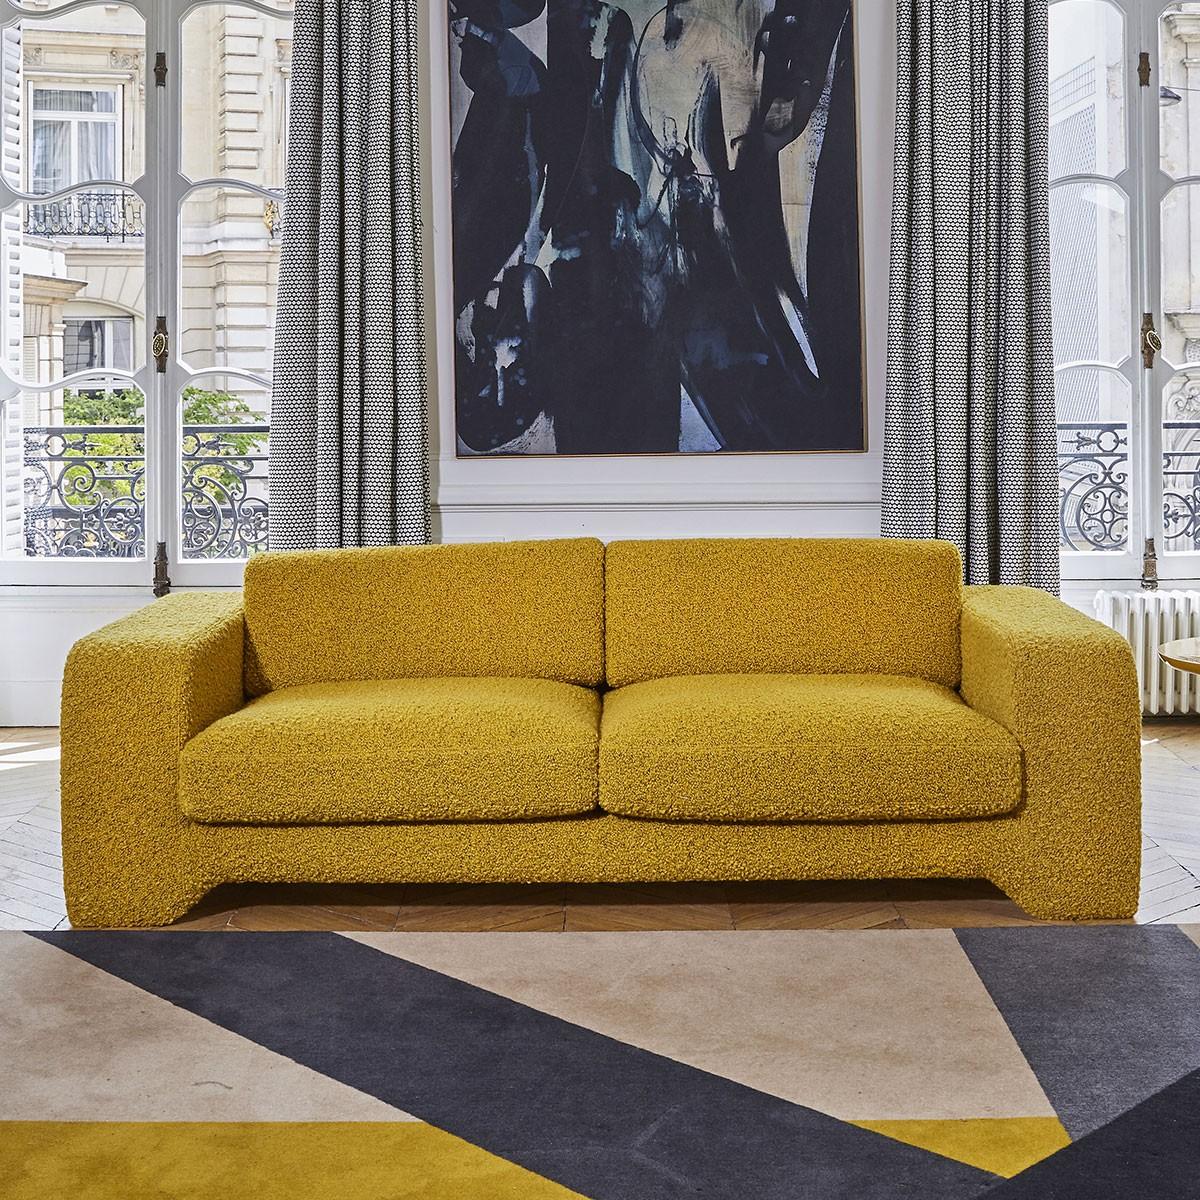 Popus editions Giovanna 4 seater sofa in vermilion como velvet upholstery.

Giovanna is a sofa with a strong profile. A sober, plush line, with this famous detail that changes everything, so as not to forget its strength of character and this